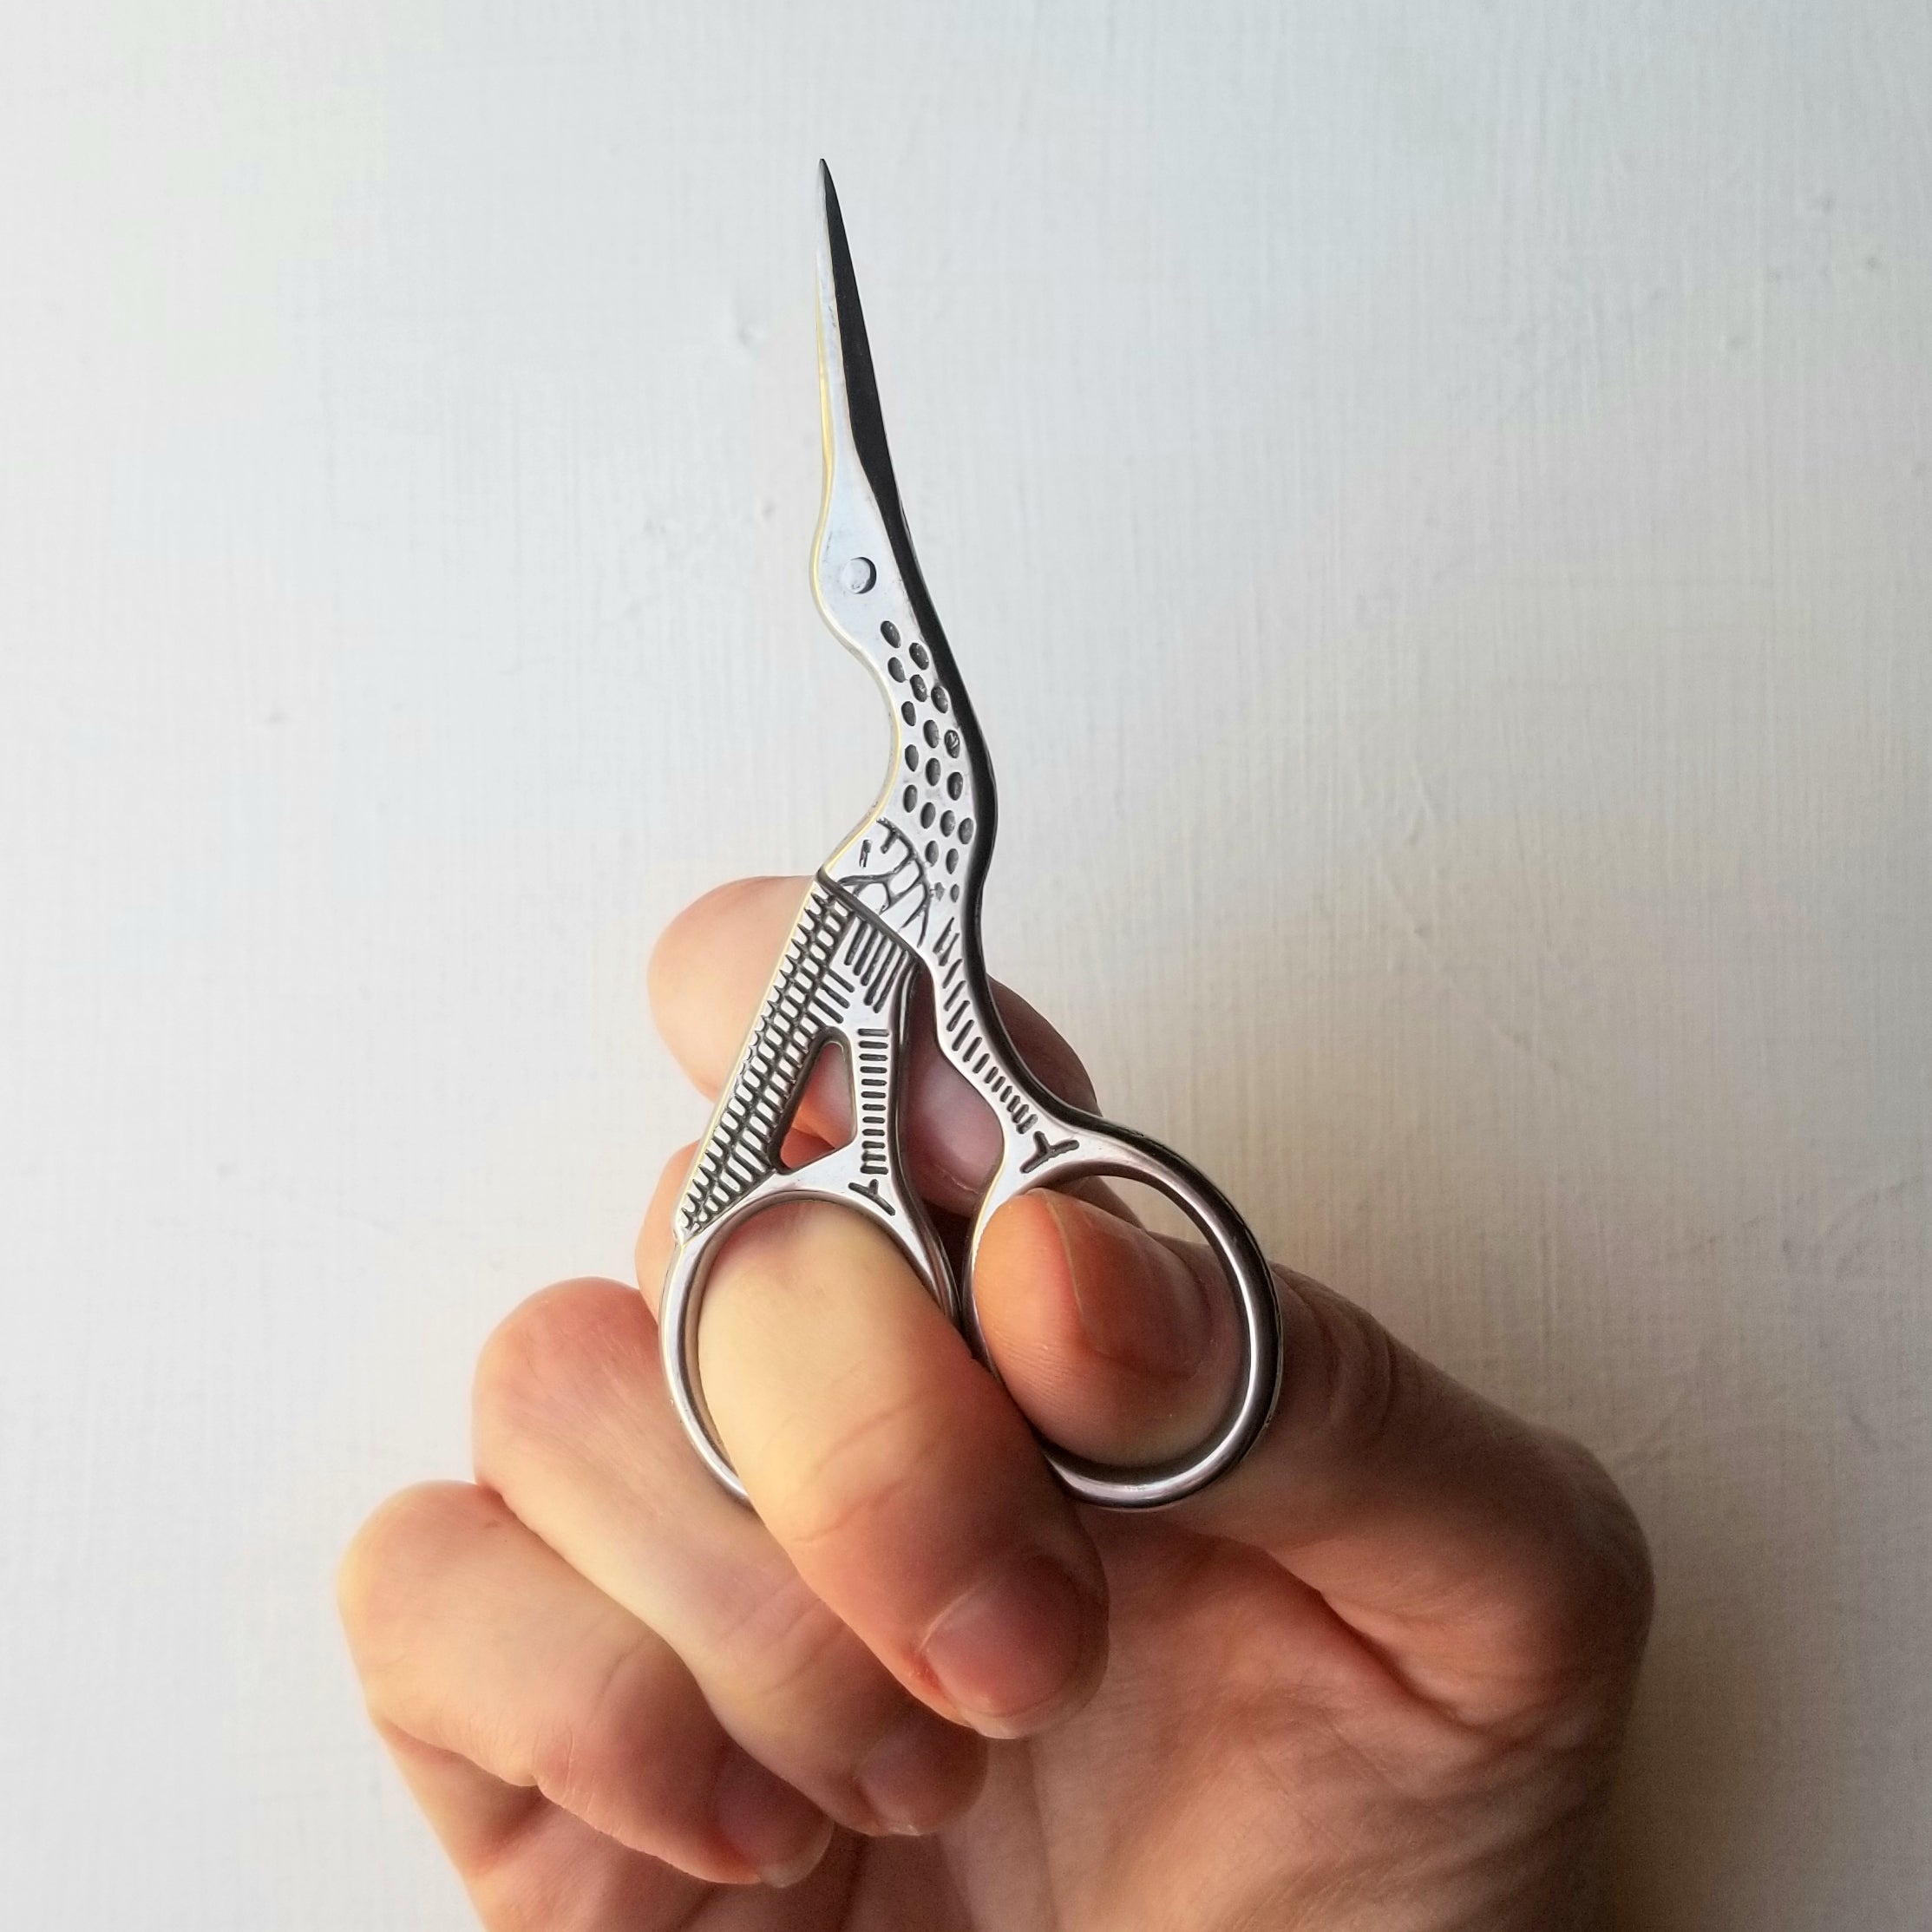 Stork Embroidery Scissors – Sincerely Laura